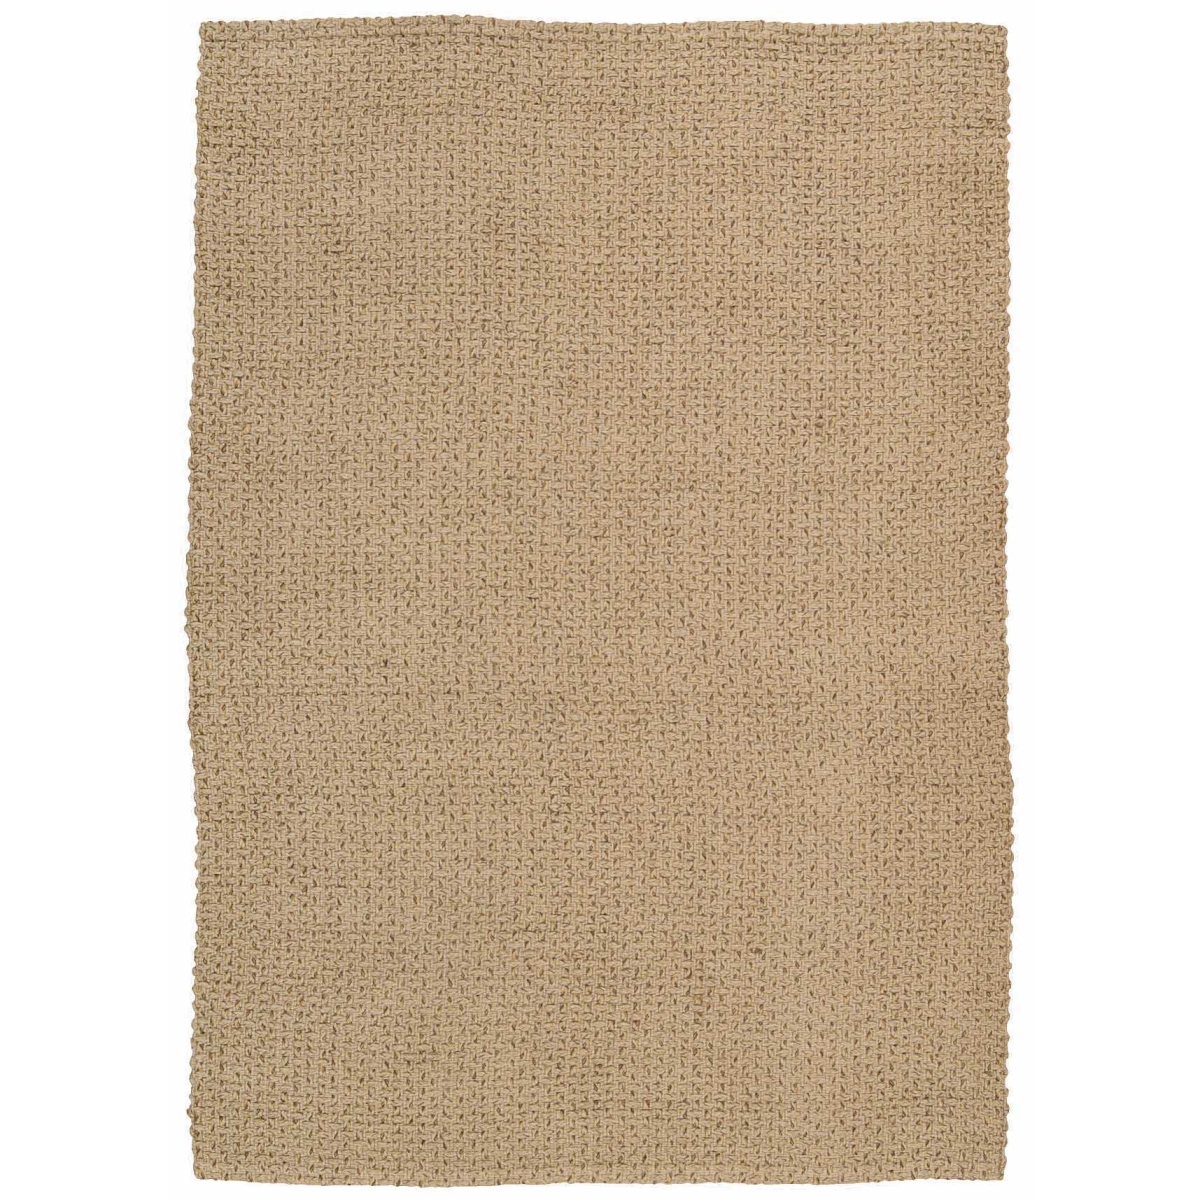 841491109700 5 Ft. 3 In. X 7 Ft. 4 In. Nourison Sand & Slate Natural Area Rug